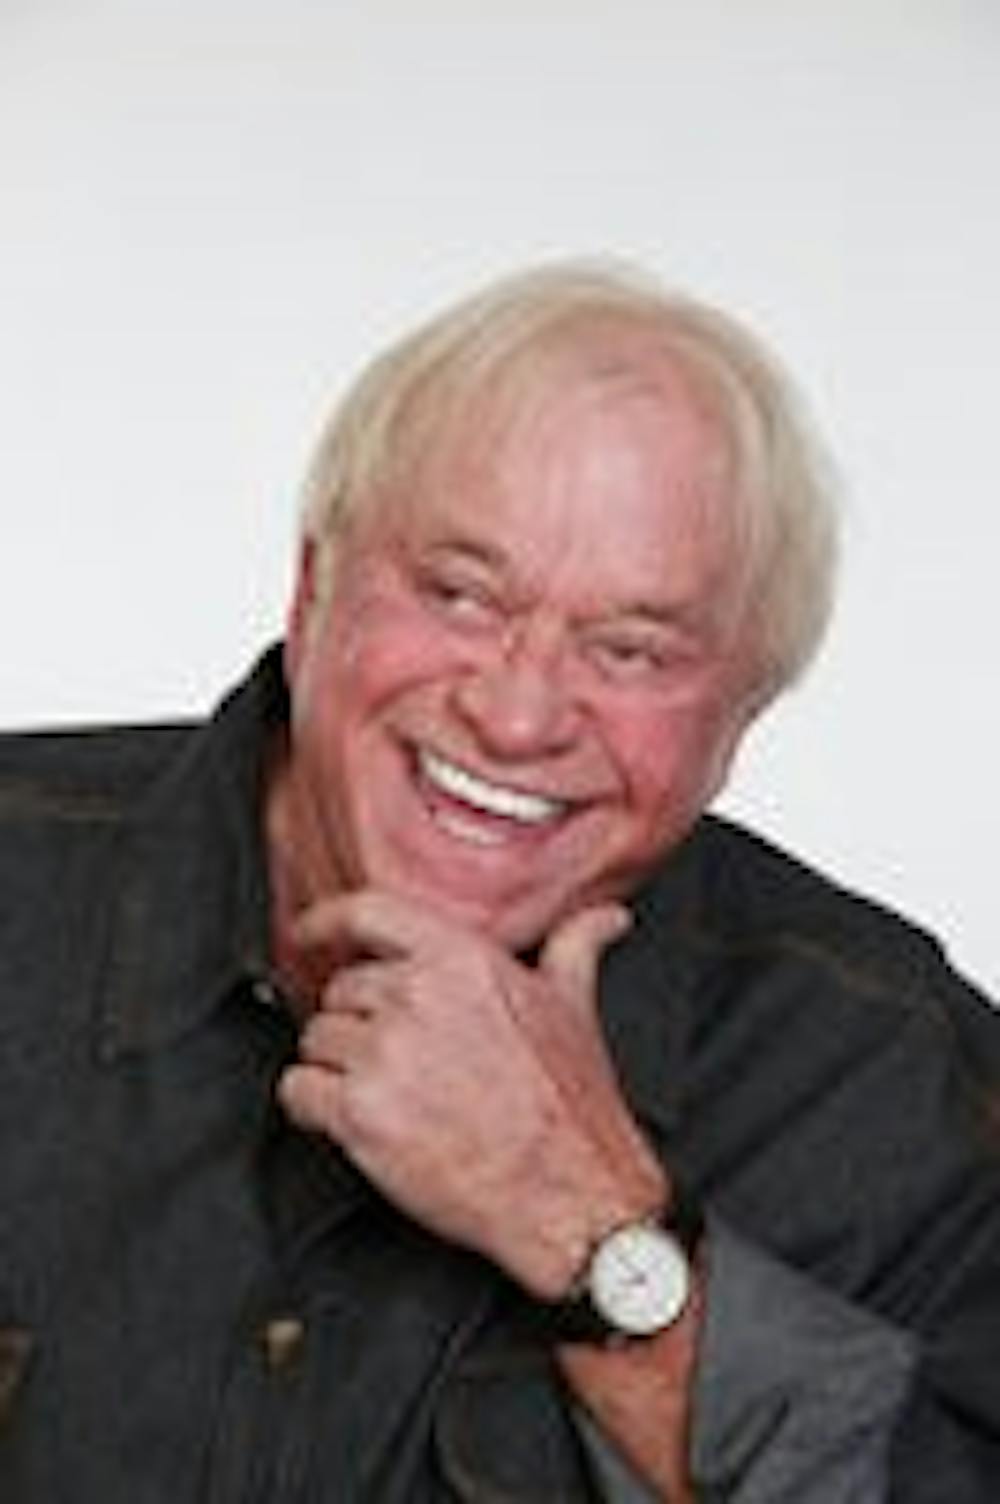 According to Sisselman, even though Gregory has been in the business for decades, he continues to be able to attract crowds to his live shows. (Contributed by James Gregory)